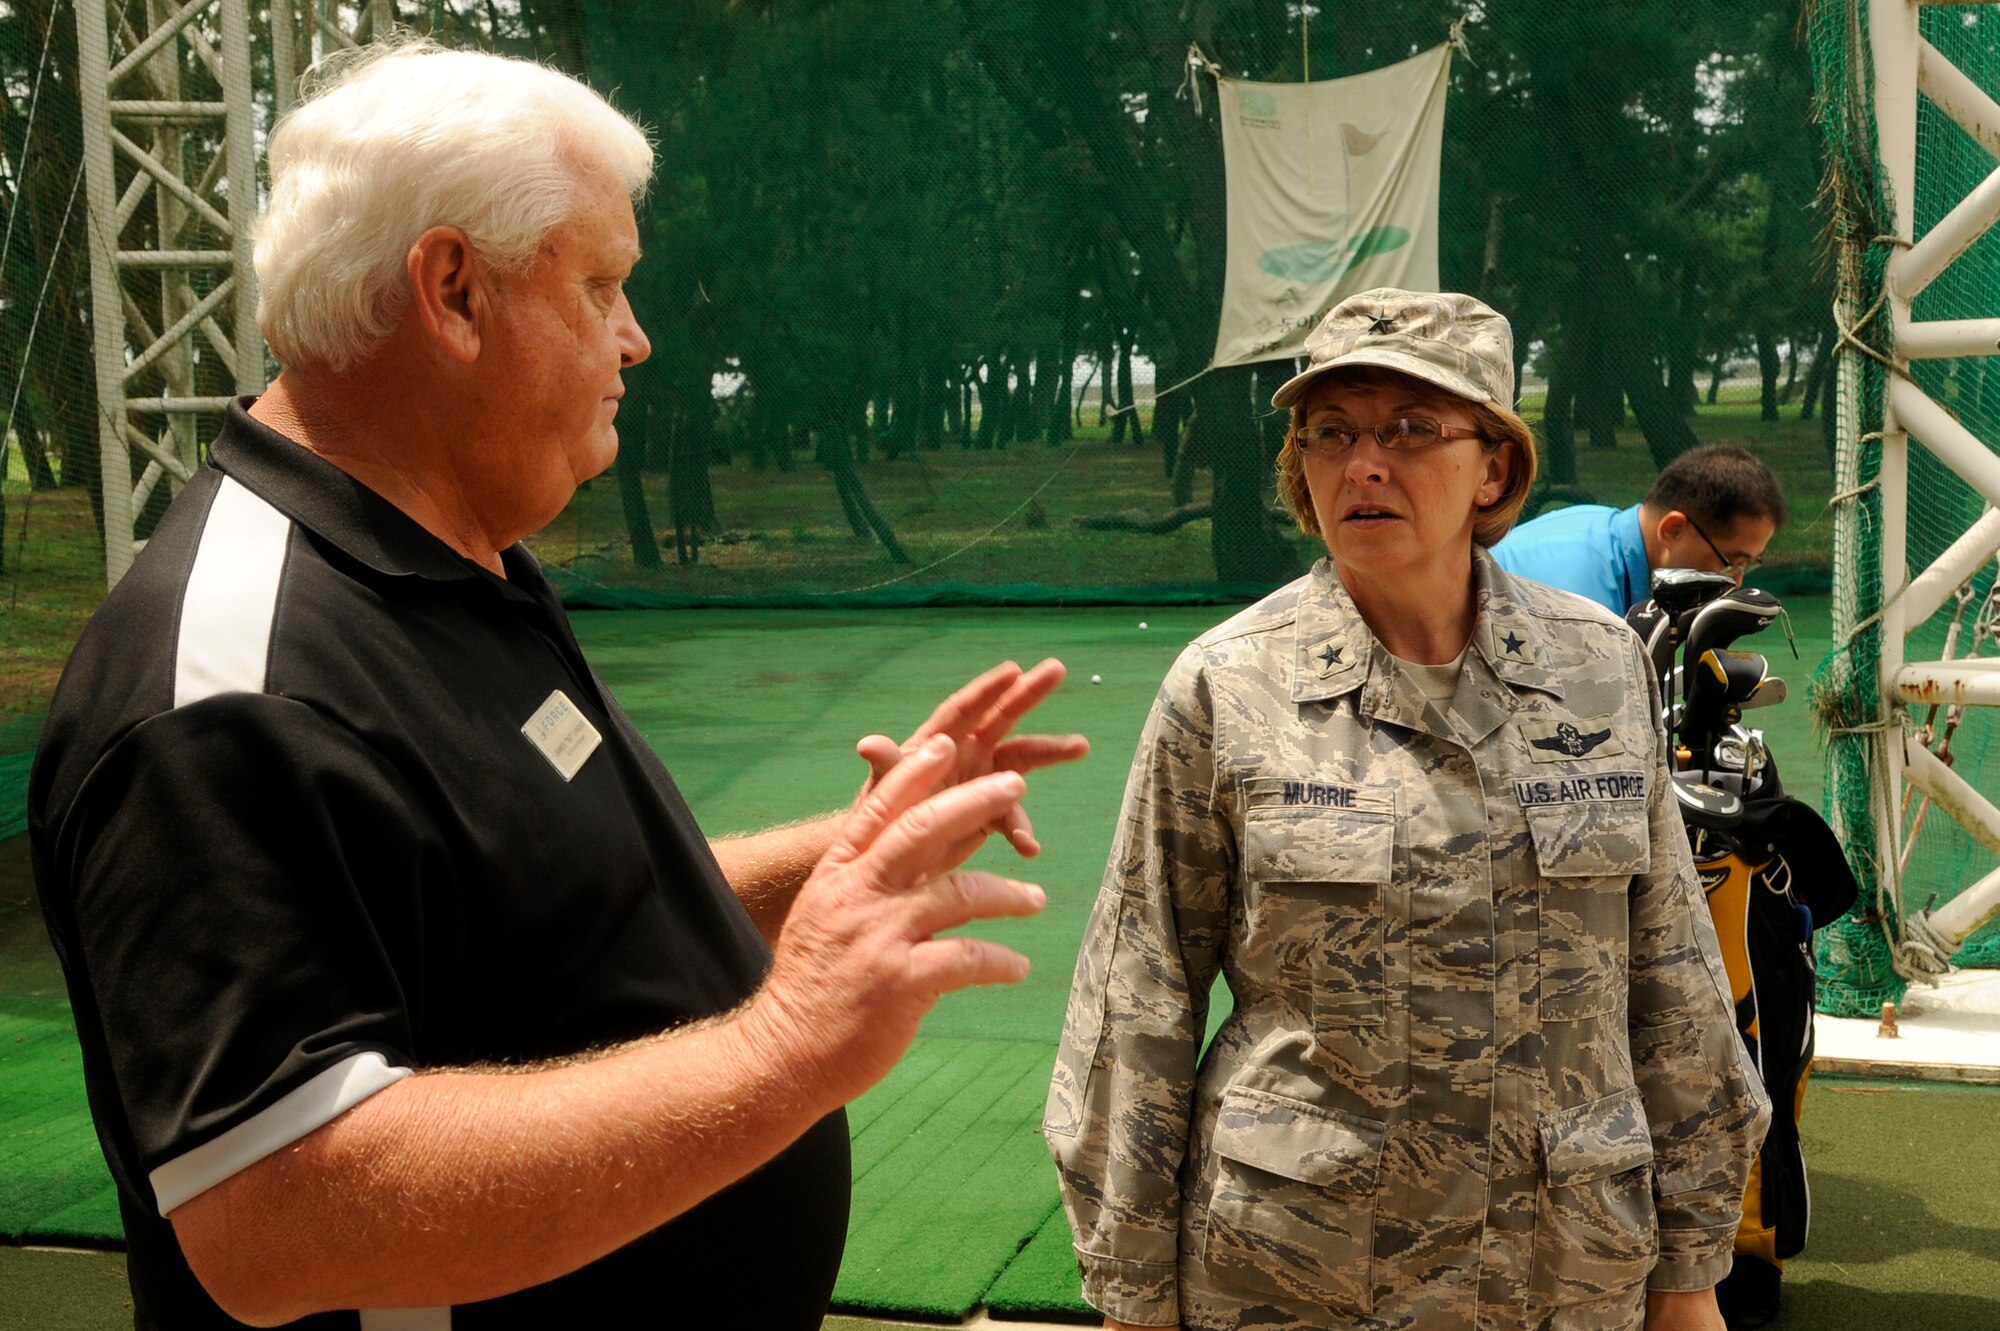 James Under, 8th Force Support Squadron golf course manager, shows Brig. Gen. Eden Murrie, Air Force Services director, what the golf course offers at Kunsan Air Base, Republic of Korea, Aug. 14, 2012. Murrie visited many Force Support establishments to see what needed improvements and how effectively they are operating . (U.S. Air Force photo/Senior Airman Marcus Morris)